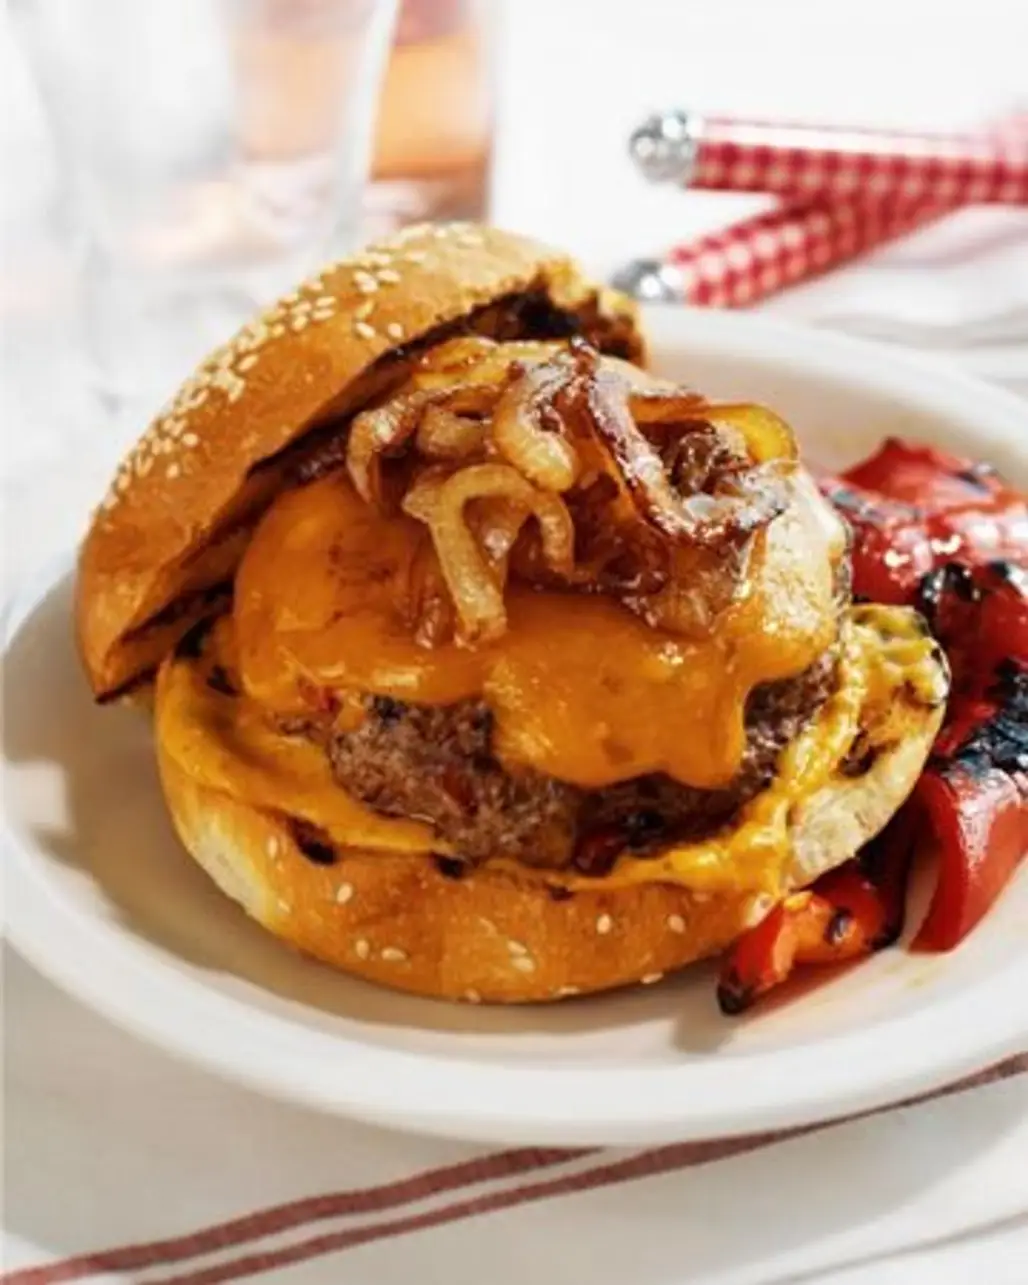 Chipotle Burger with Caramelized Red Onions